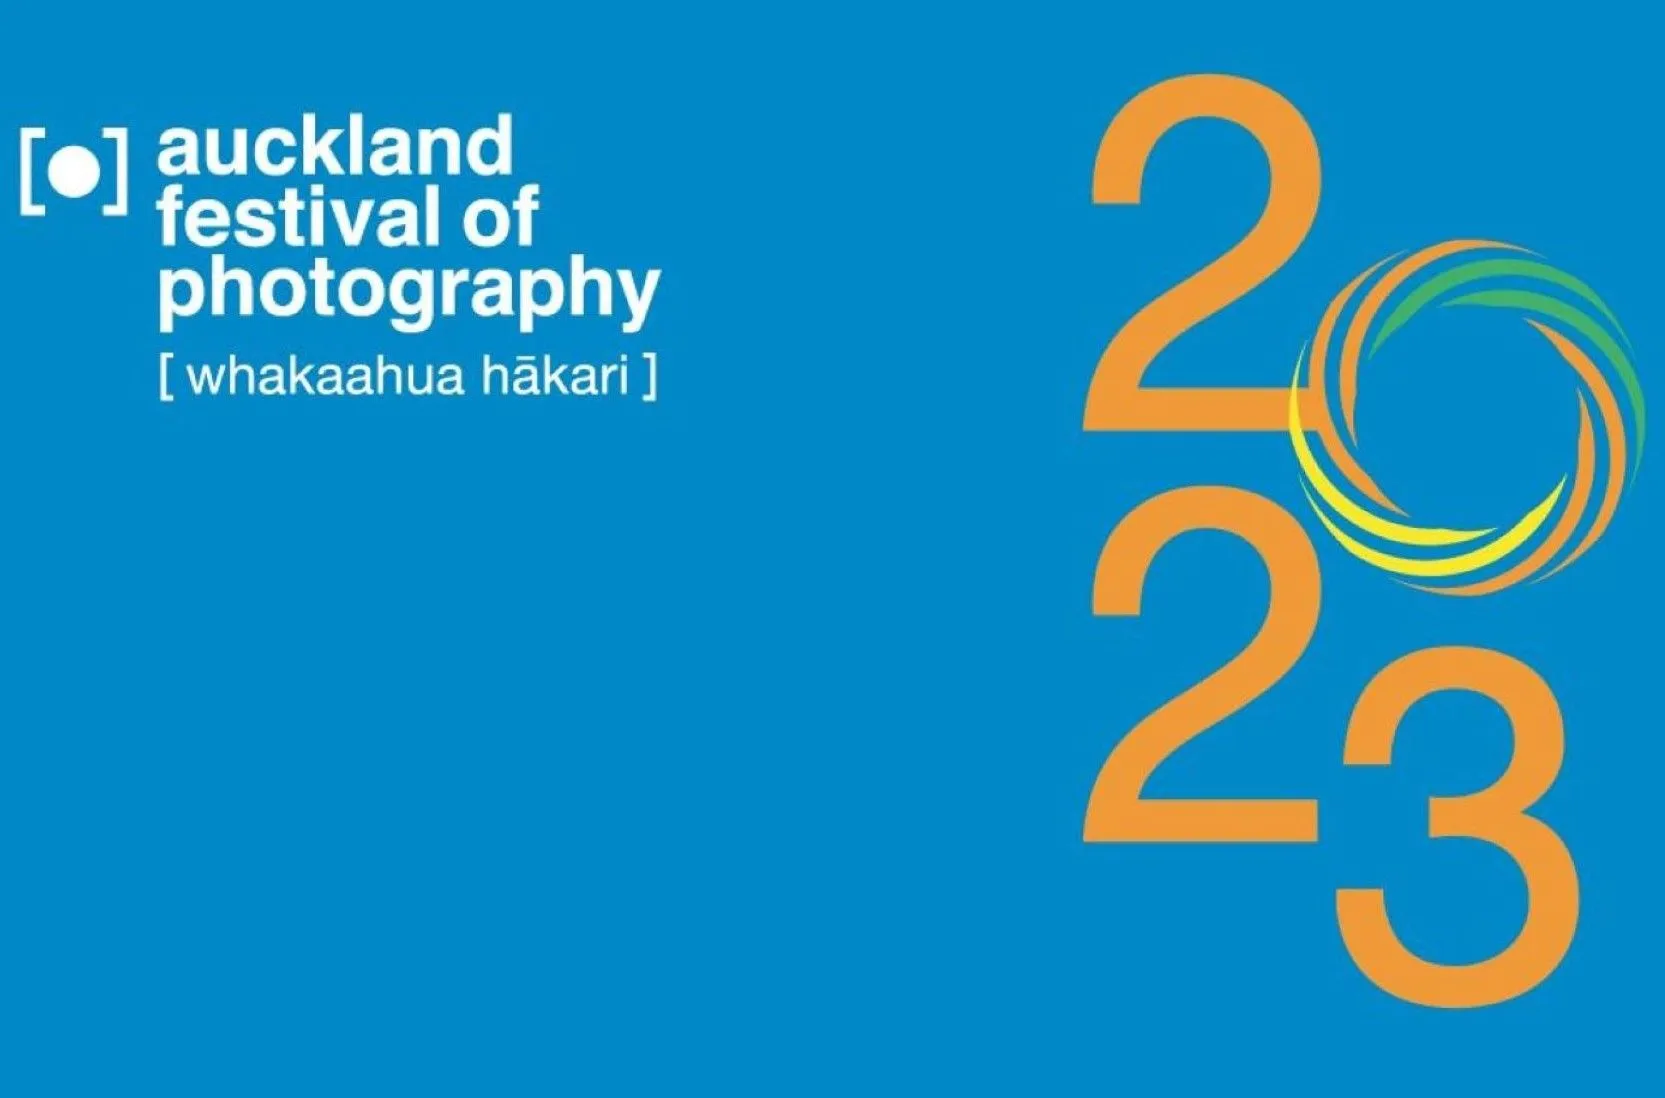 20th Auckland Festival of Photography - a free celebration of visual culture